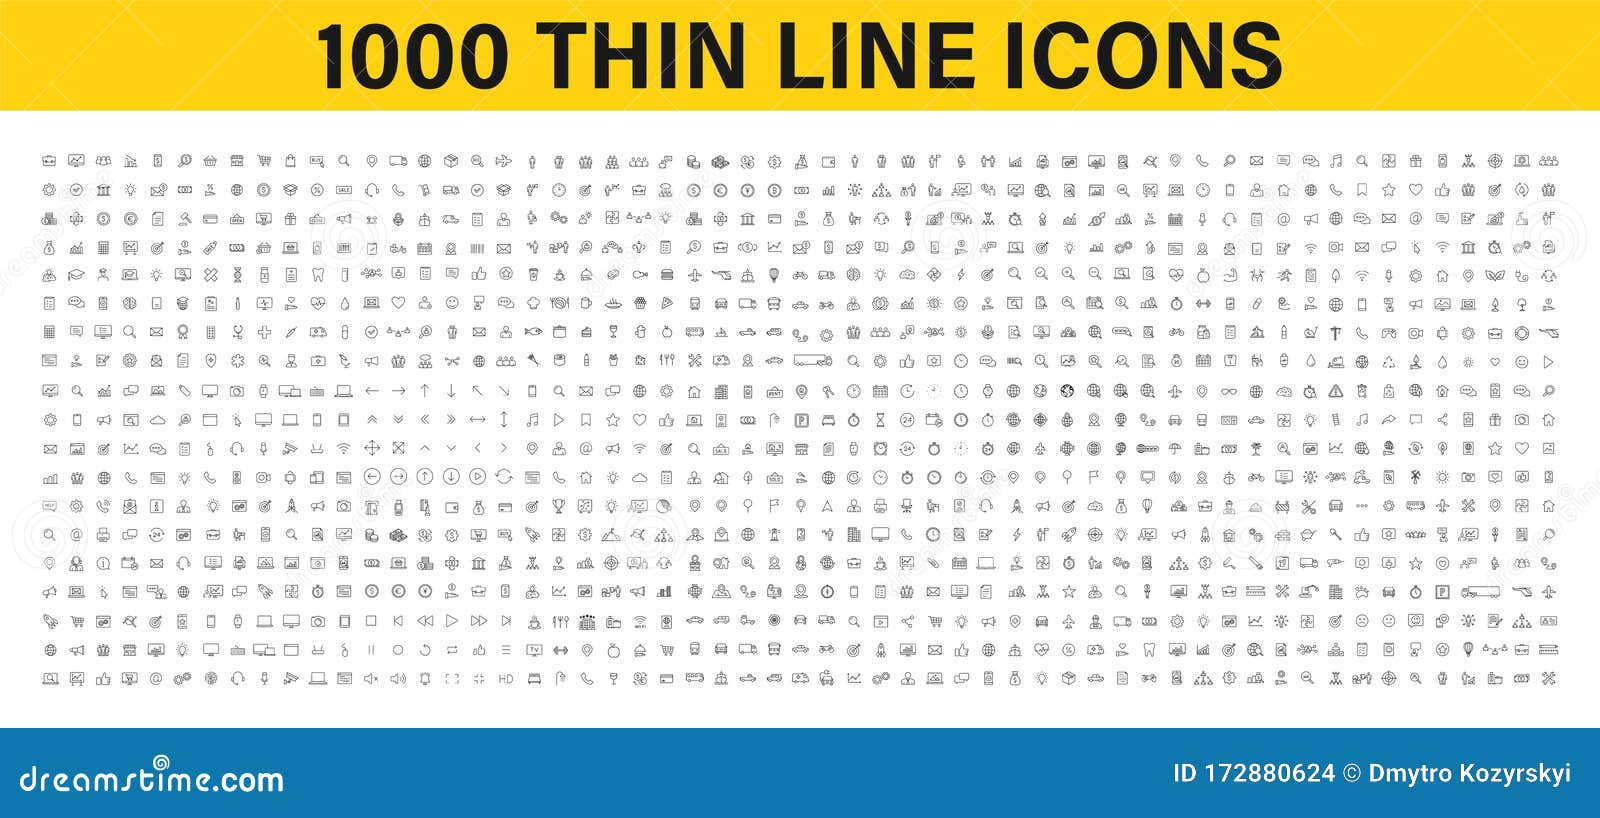 big set of 1000 thin line web icon. business, finance, shopping, logistics, medical, health, people, teamwork, contact us, arrows